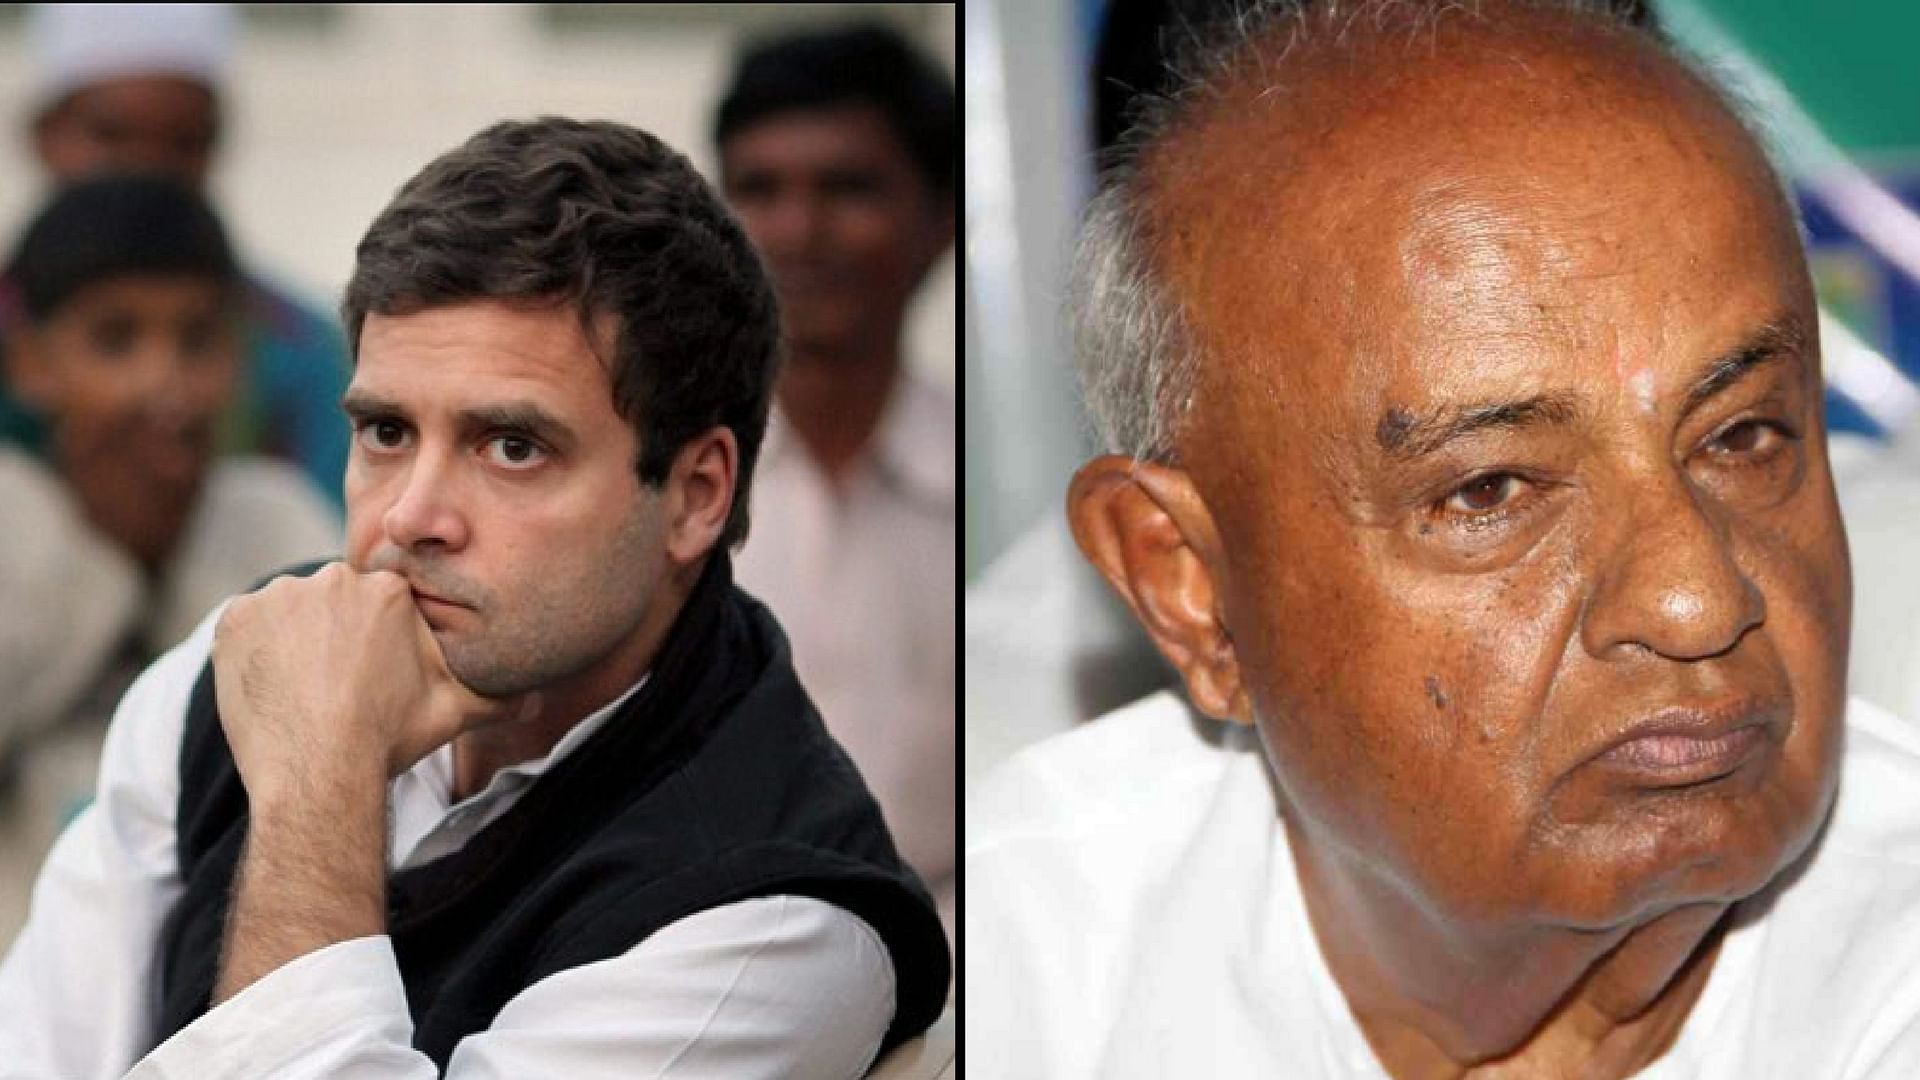 Congress president Rahul Gandhi clarified he has nothing personal against former prime minister and JD(S) chief HD Deve Gowda.